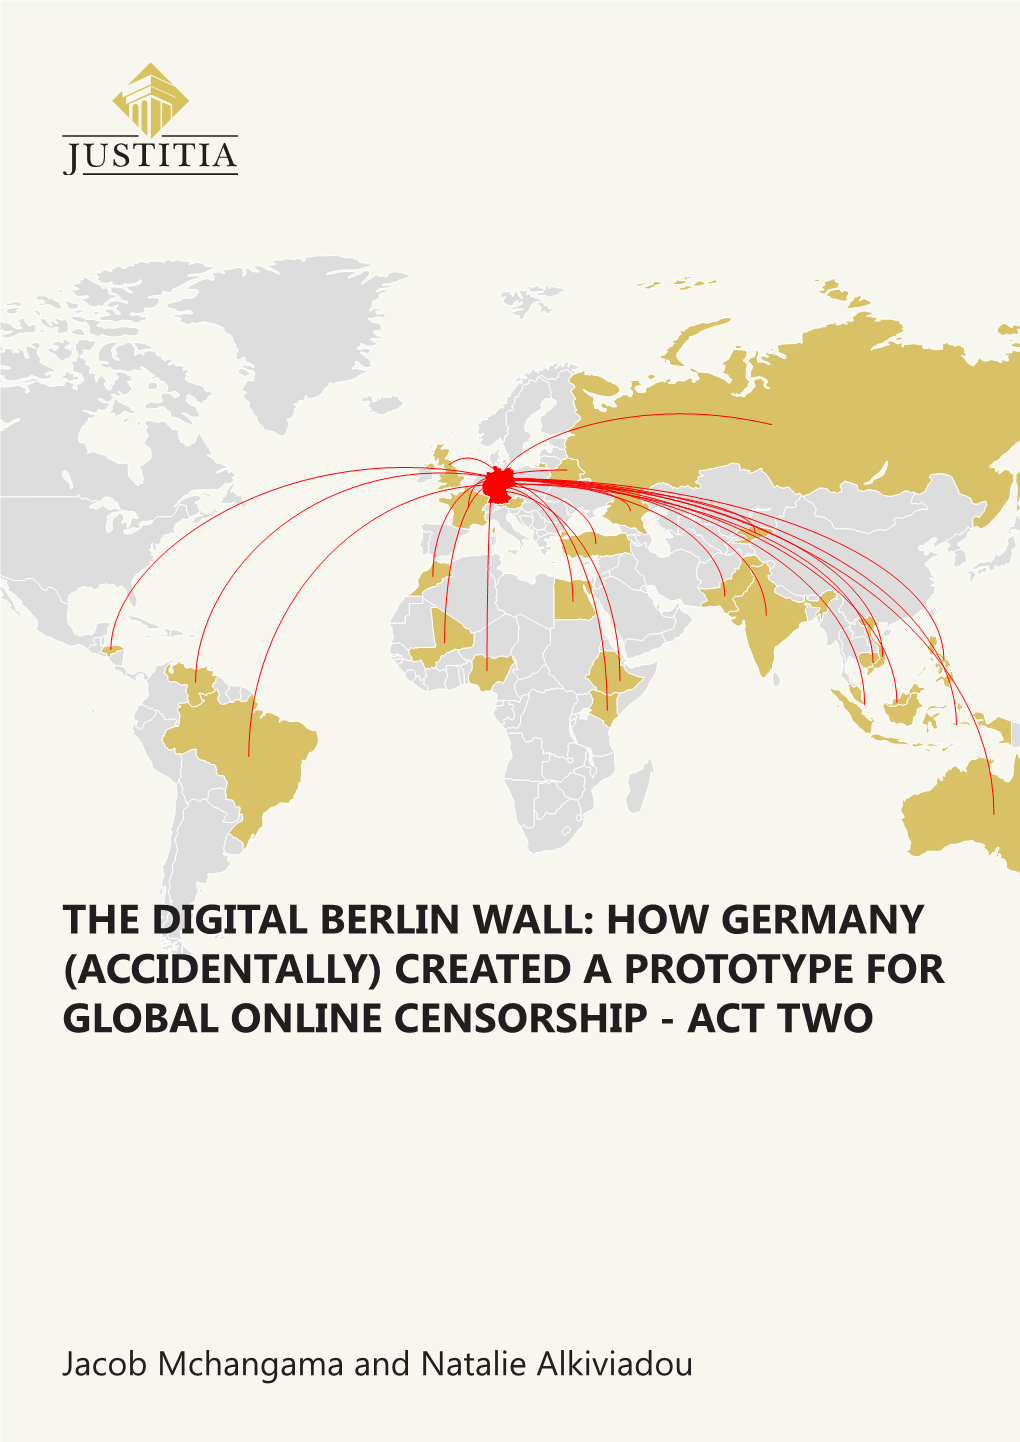 The Digital Berlin Wall: How Germany (Accidentally) Created a Prototype for Global Online Censorship - Act Two